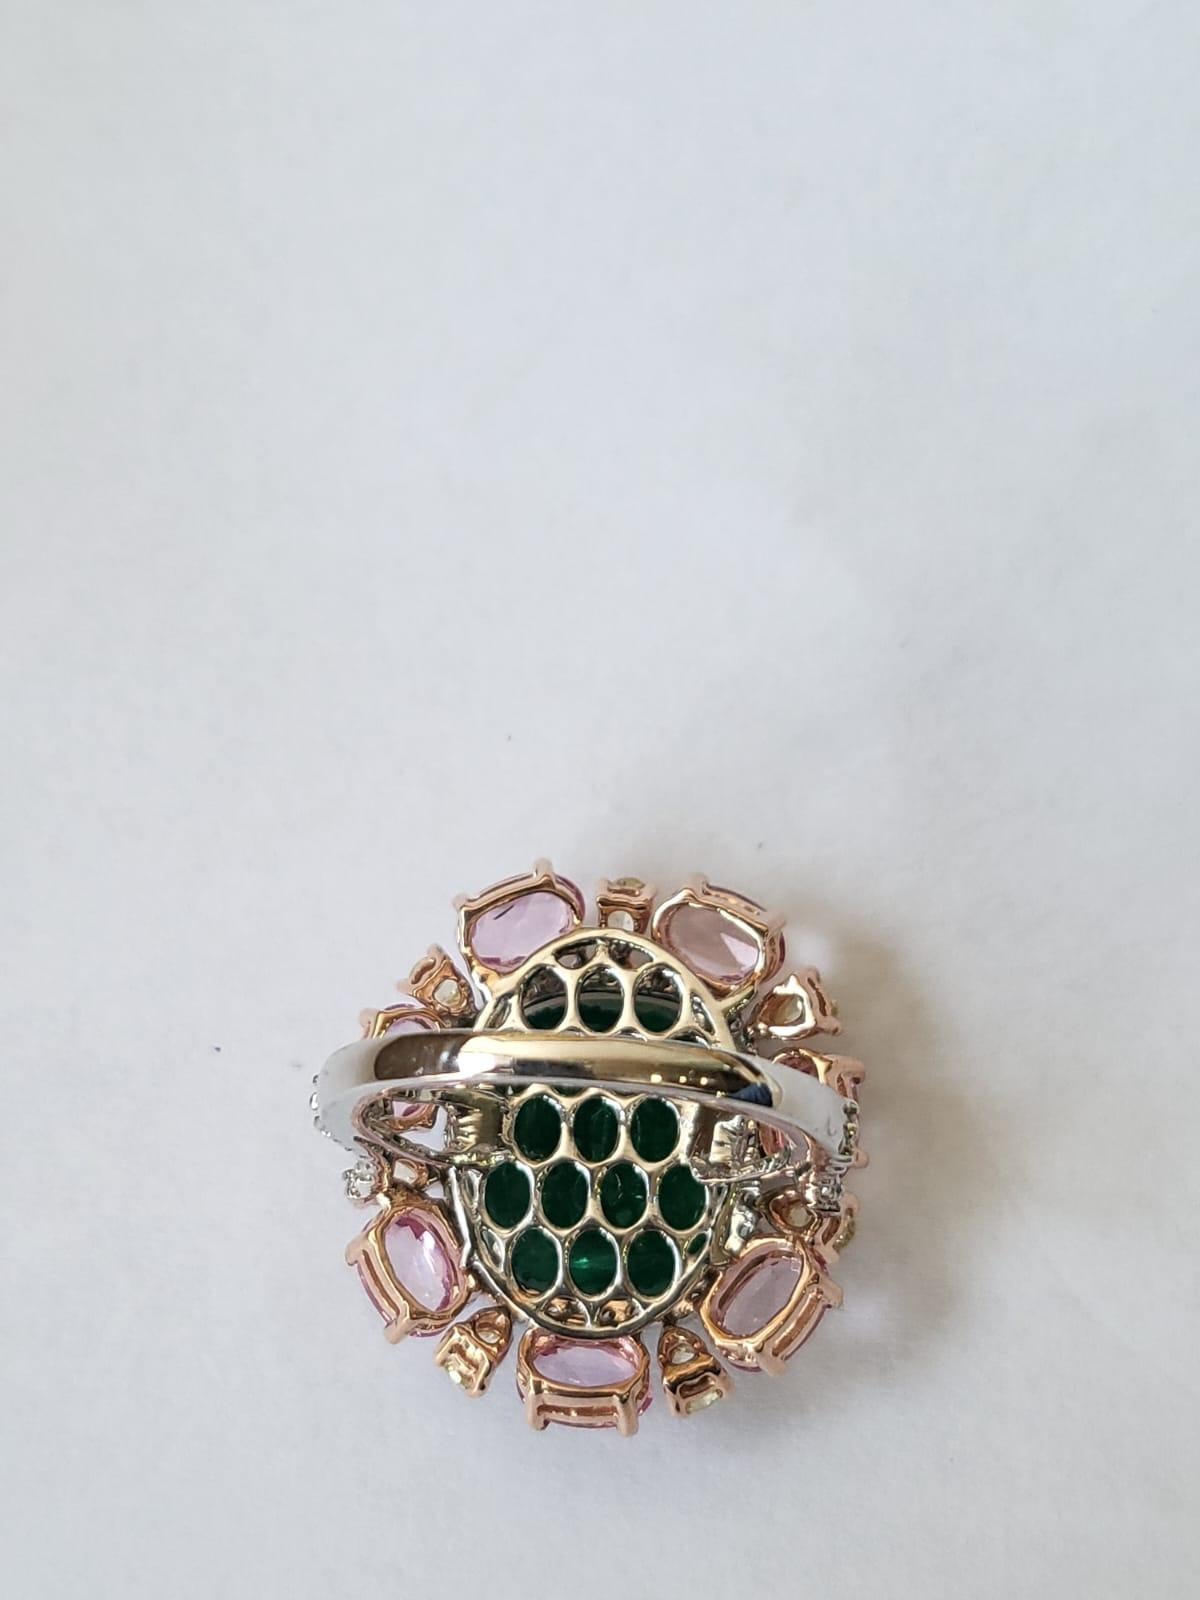 Women's or Men's Set in 18K Gold, Natural Zambian Emerald, Pink Sapphire & Diamonds Cocktail Ring